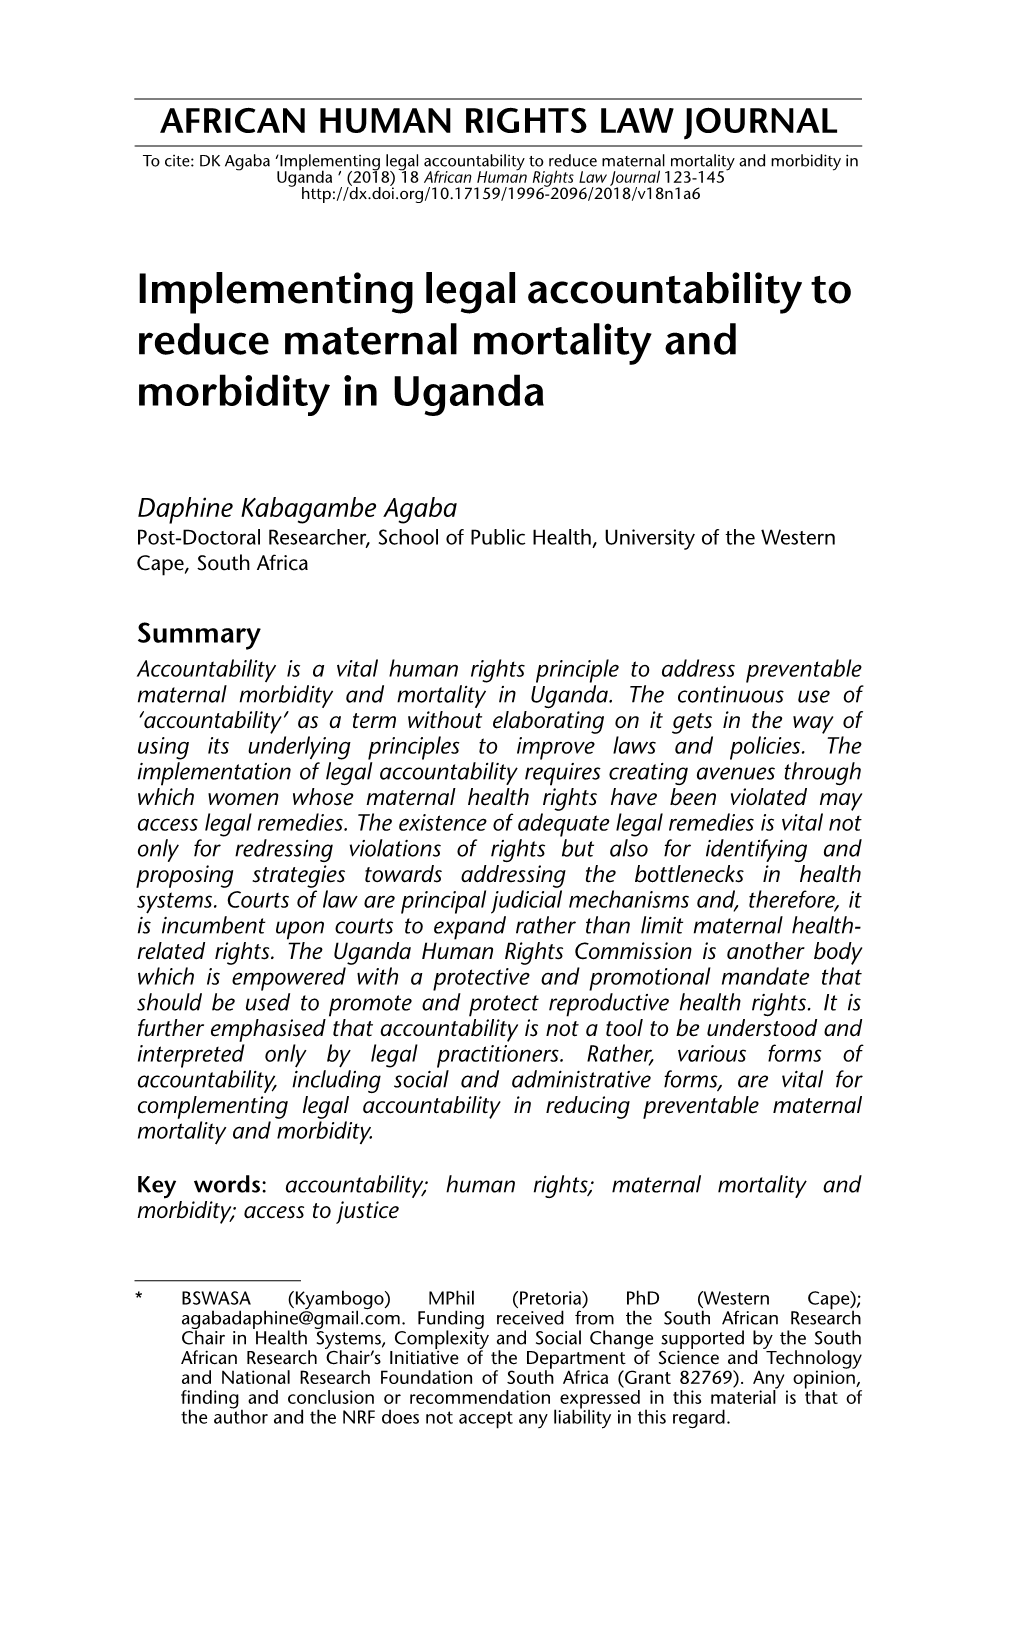 Implementing Legal Accountability to Reduce Maternal Mortality